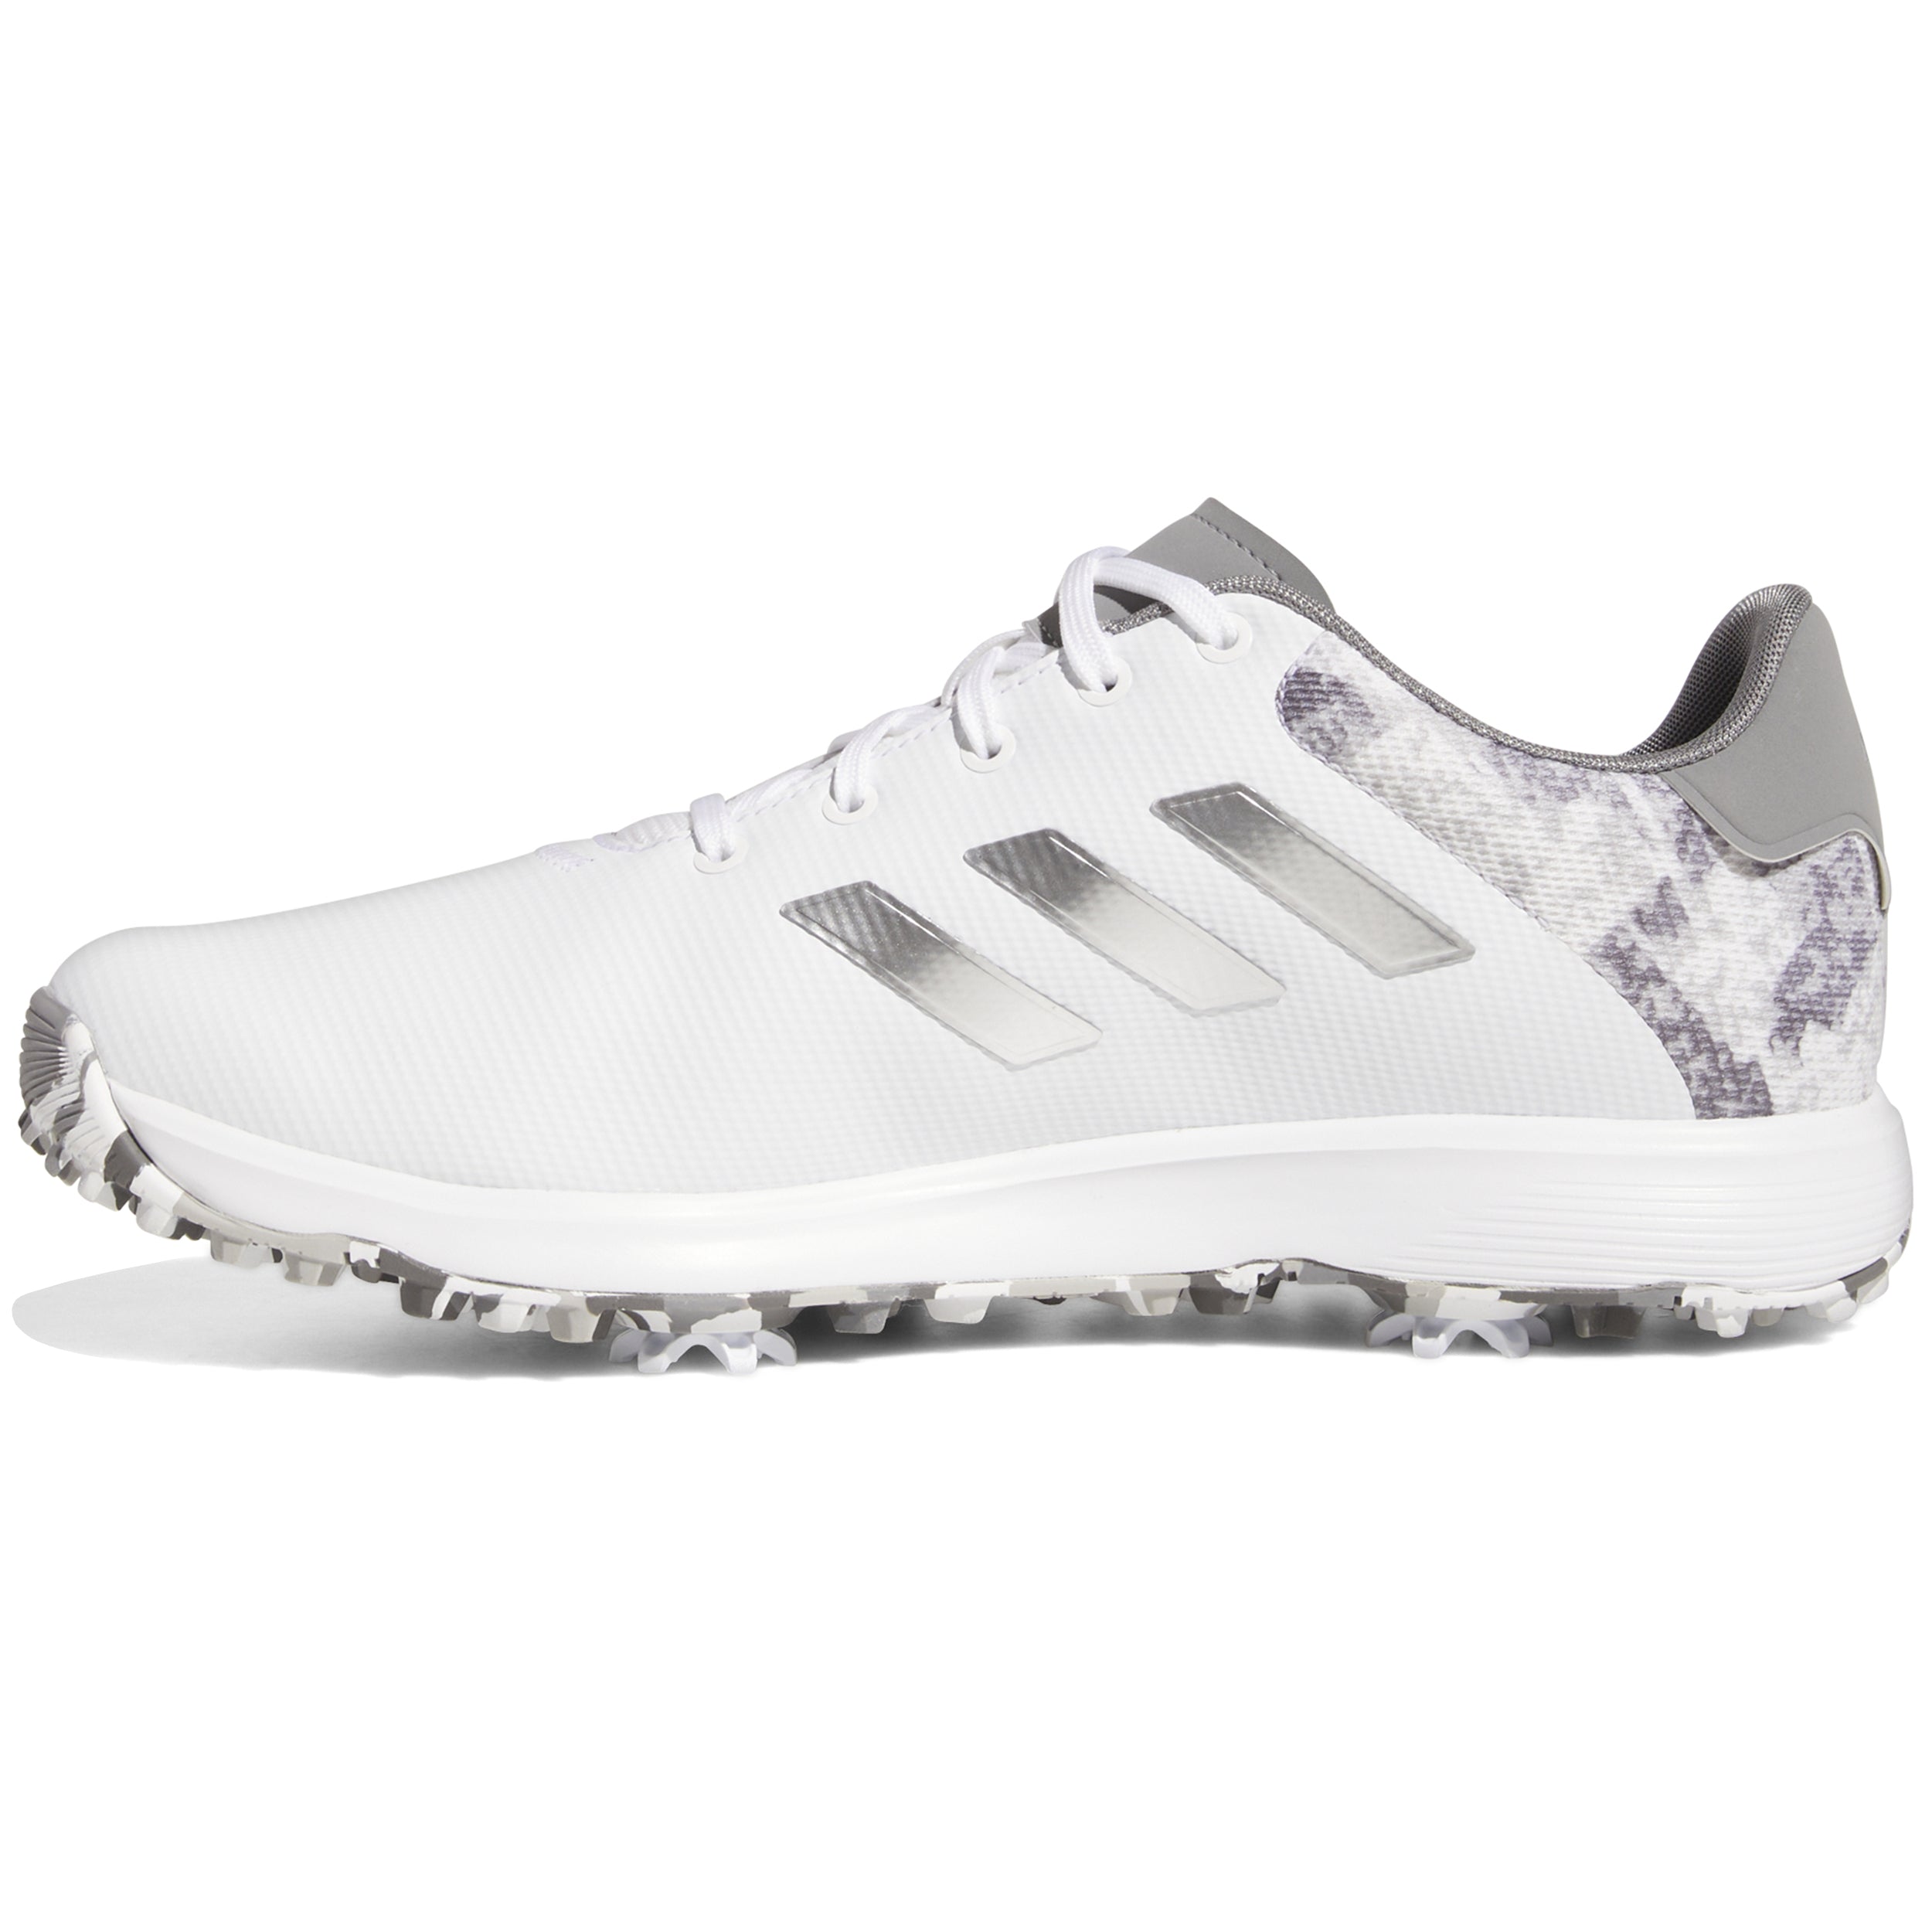 adidas S2G Spiked 23 Golf Shoes H06285 White Silver Grey Three ...